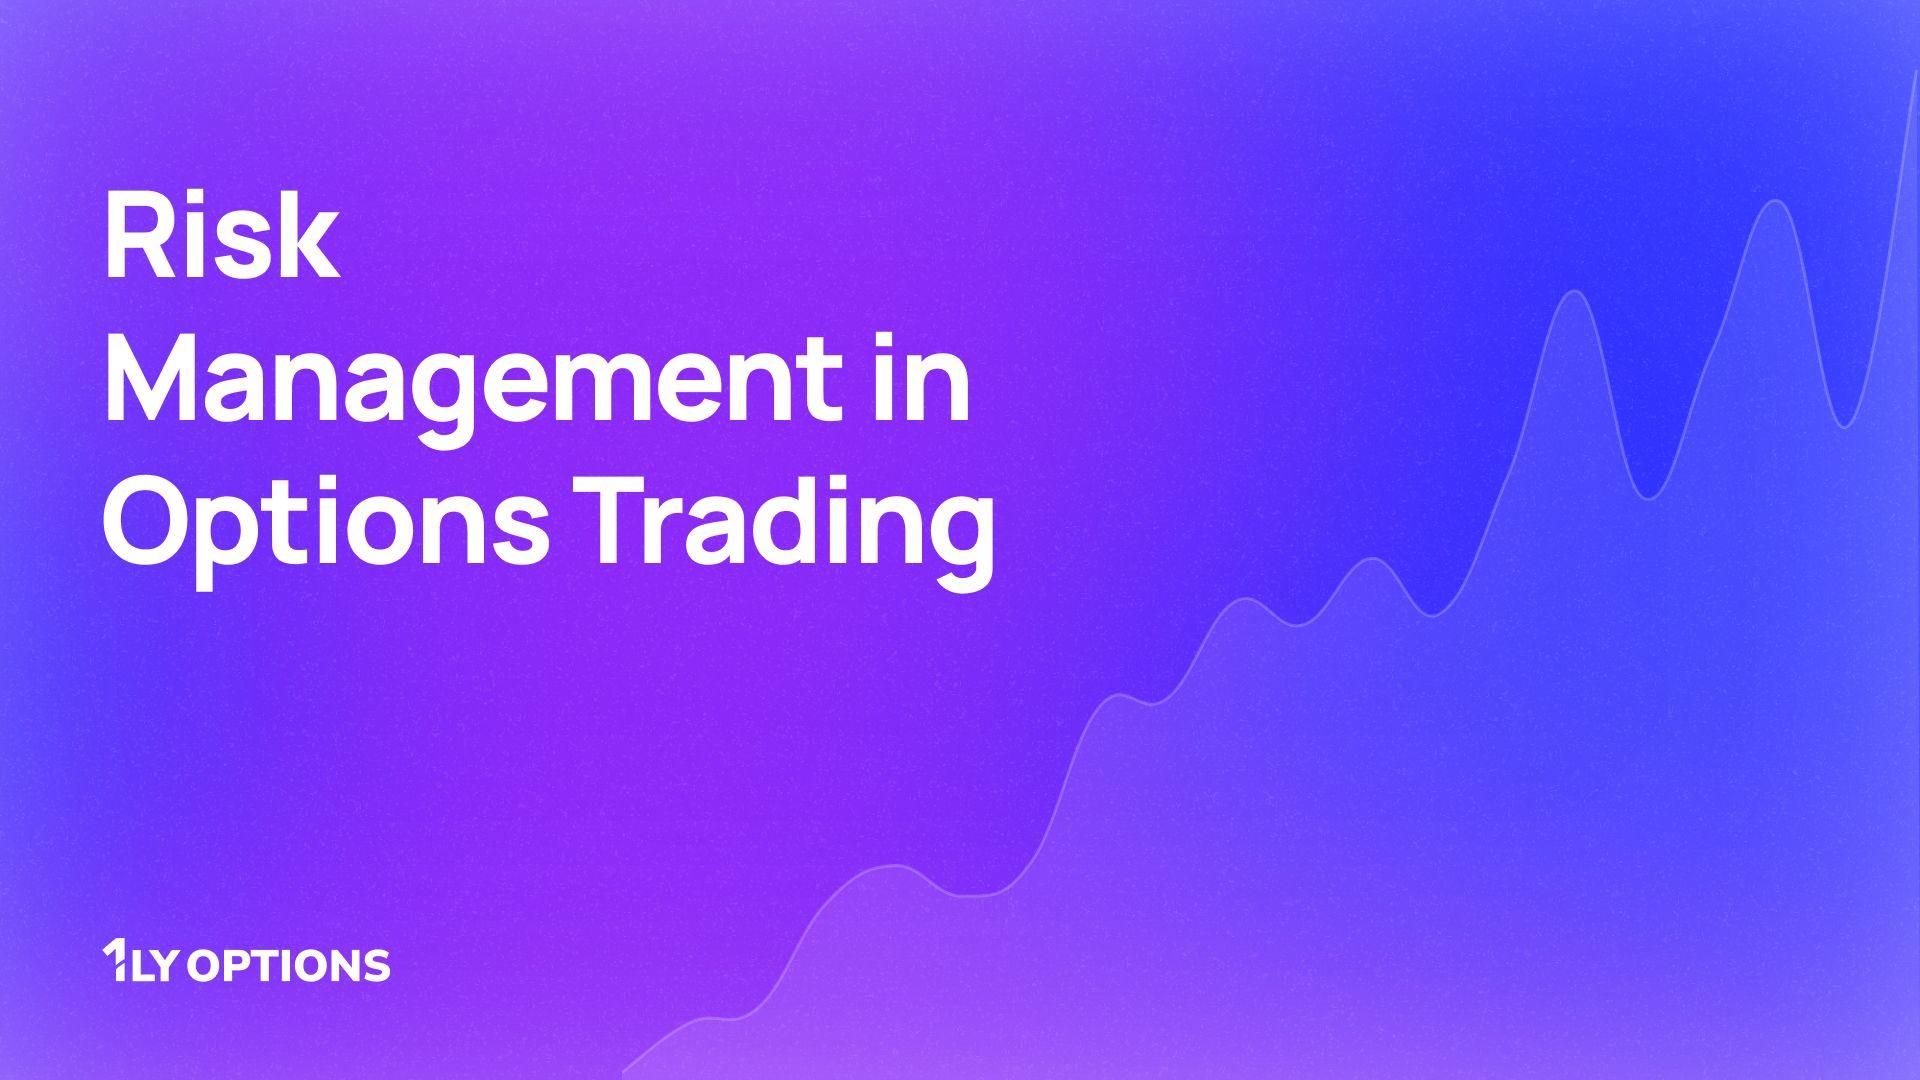 Risk Management in Options Trading